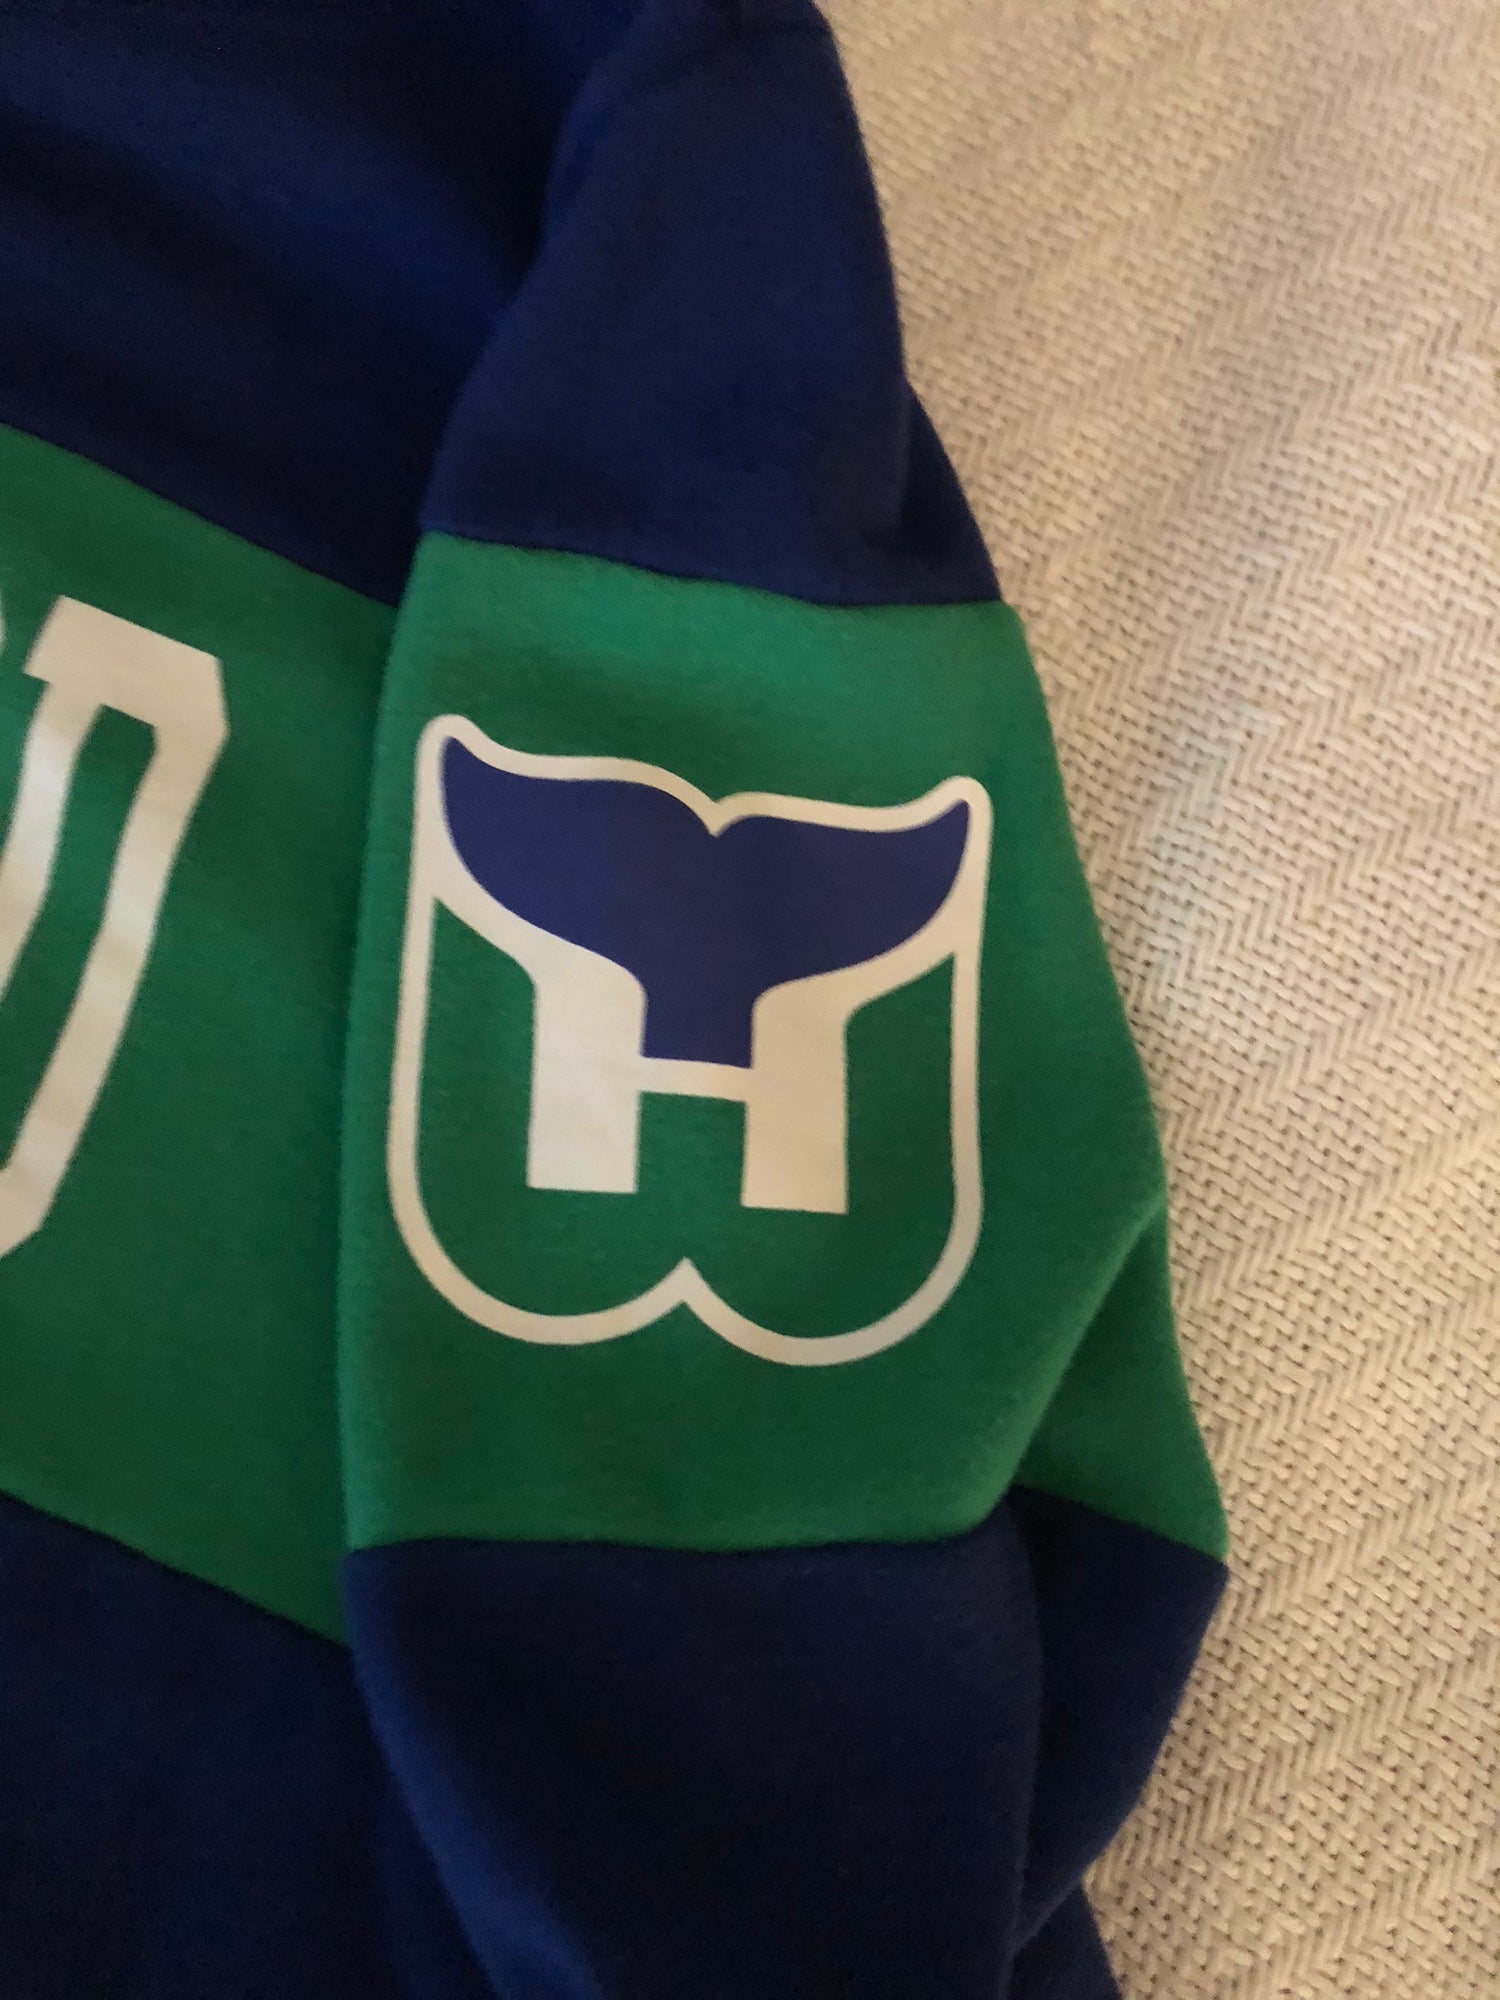 Hartford Whalers Men's 47 Brand Royal Pullover Jersey Hoodie - Small